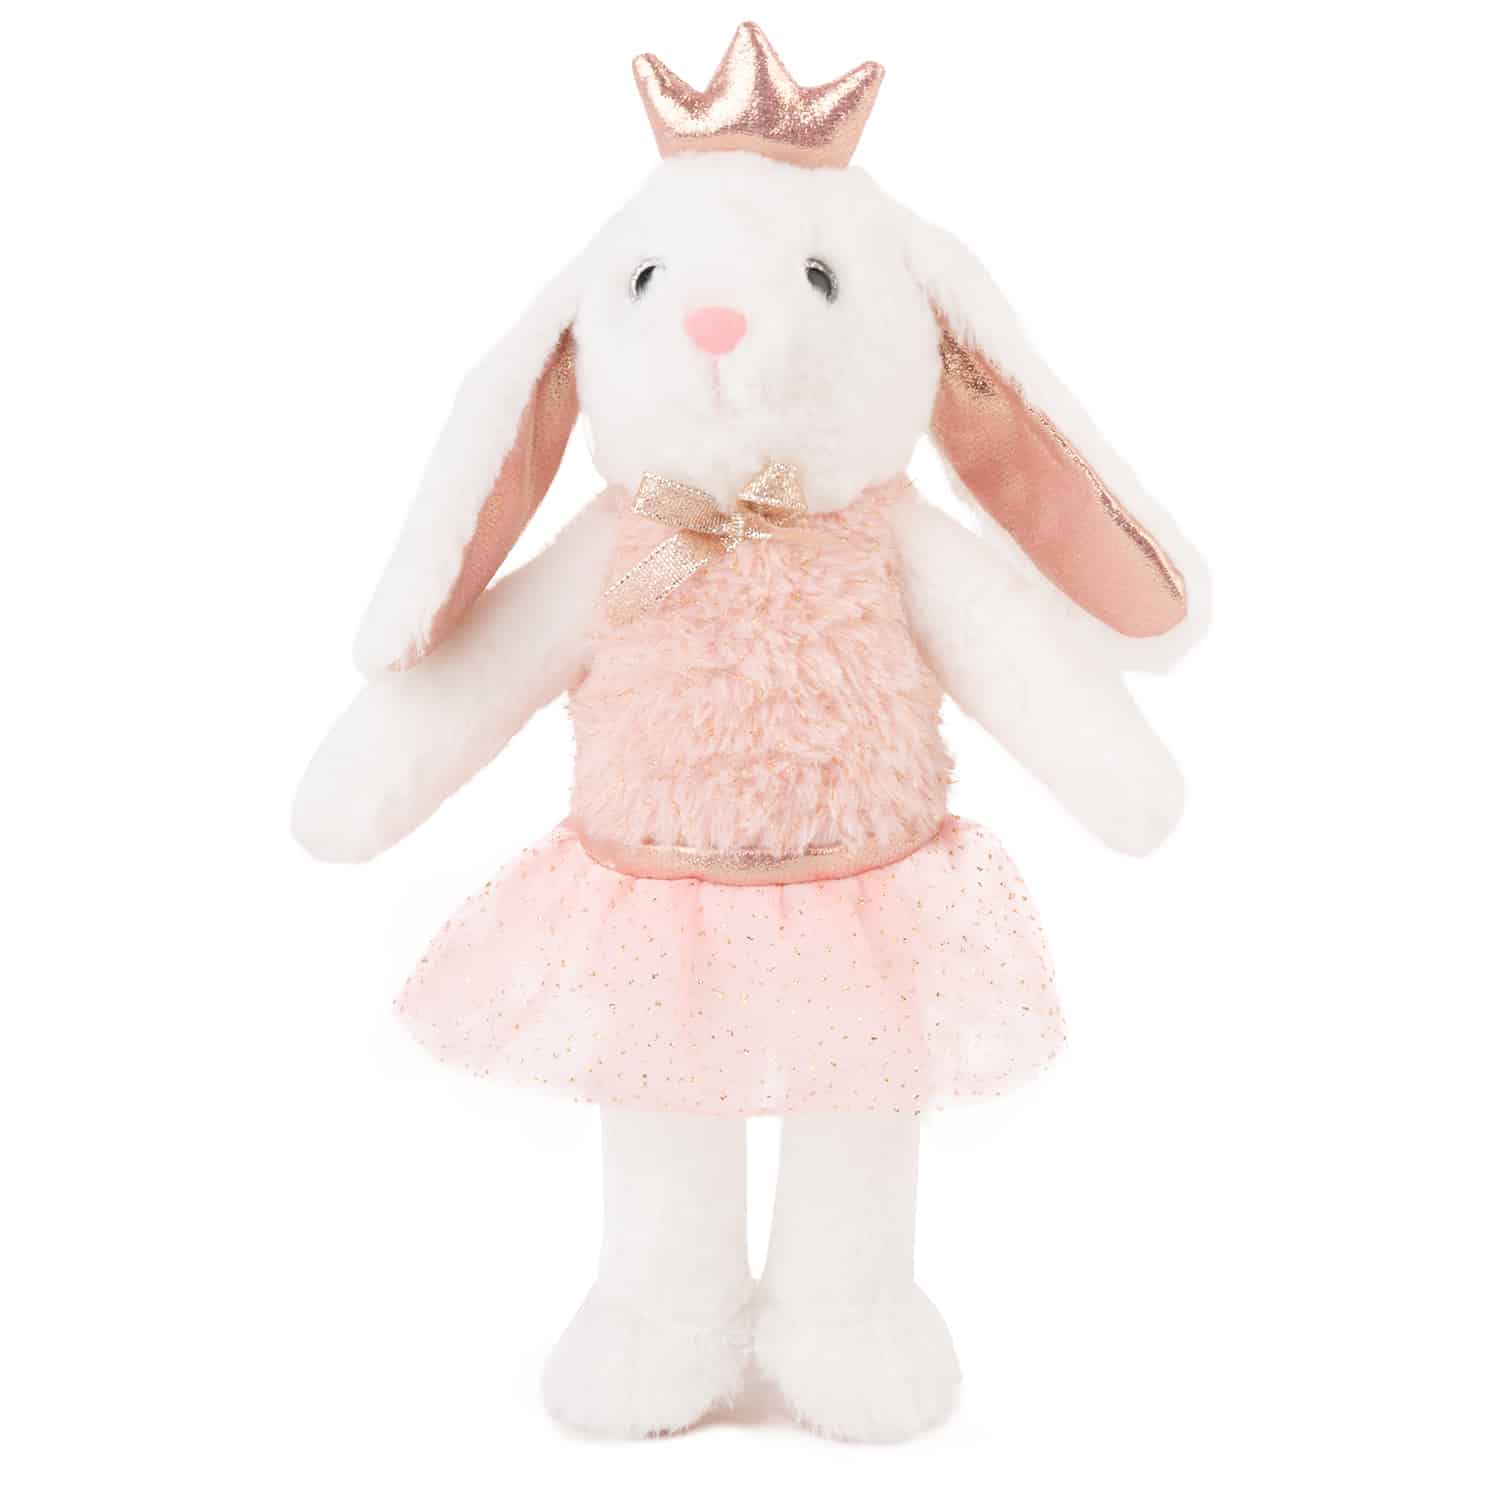 Animals with glitter dress and crown - Bunny